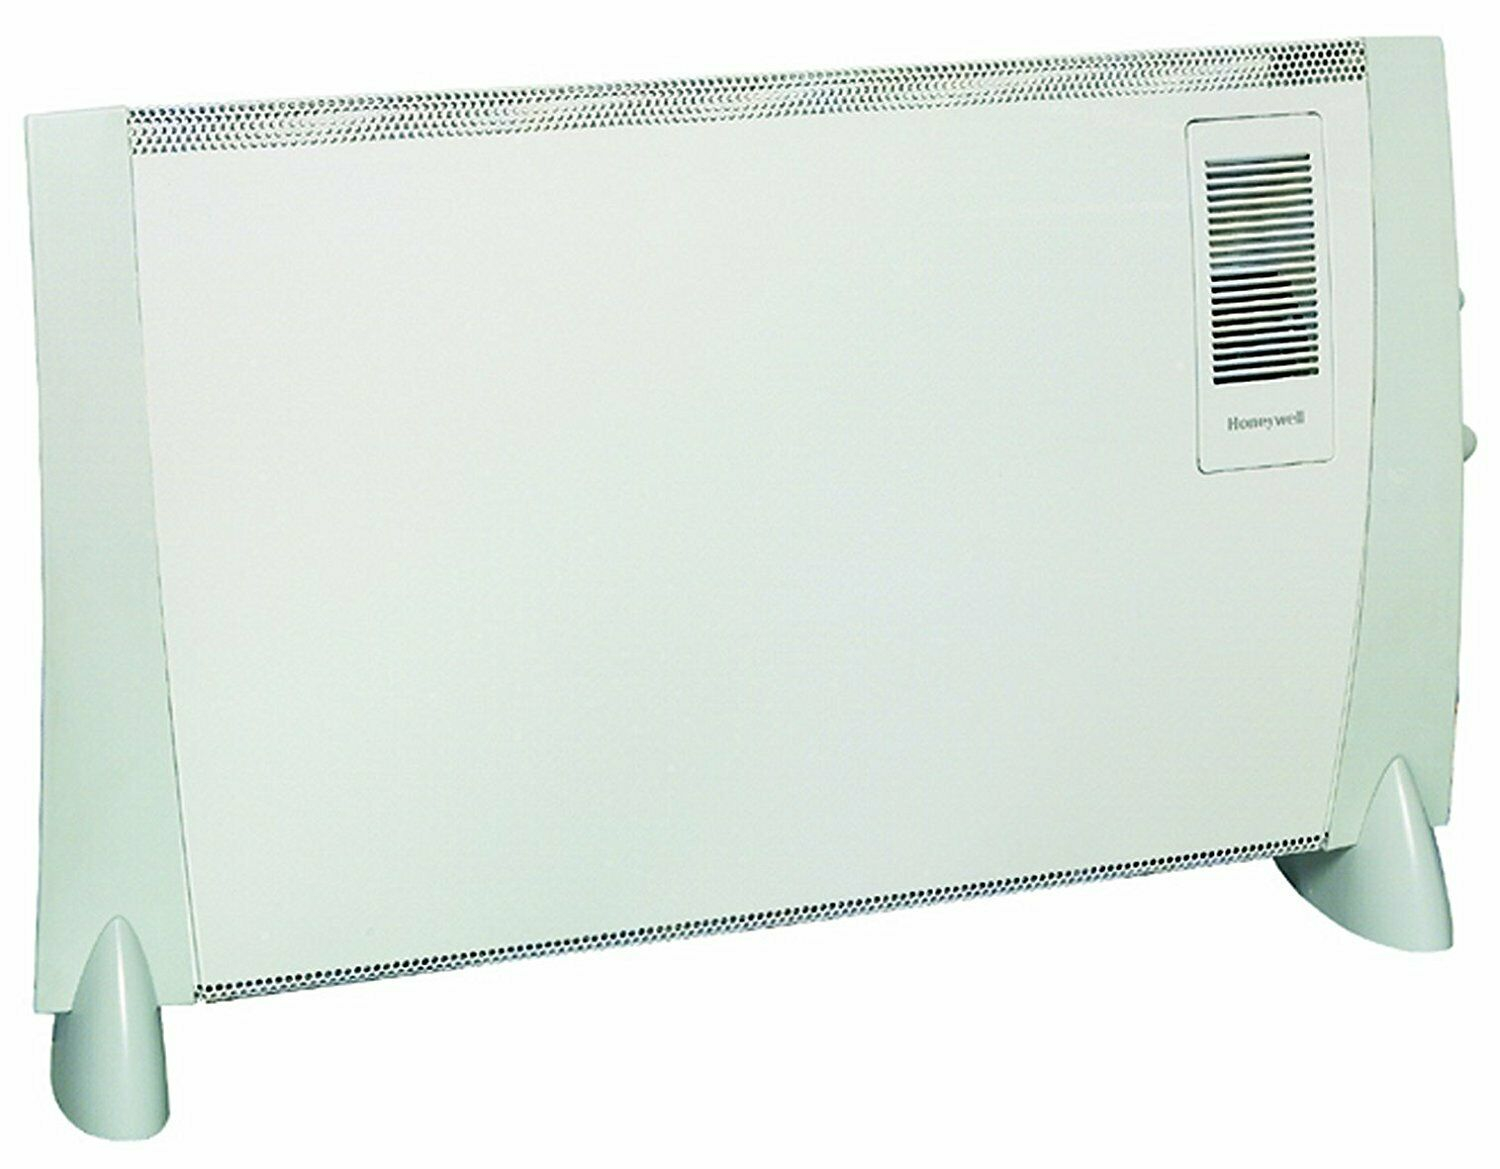 Honeywell Hz 823 Turbo Fan Convector Heater Electric Wall Stand Room 2 Kw White for measurements 1500 X 1169